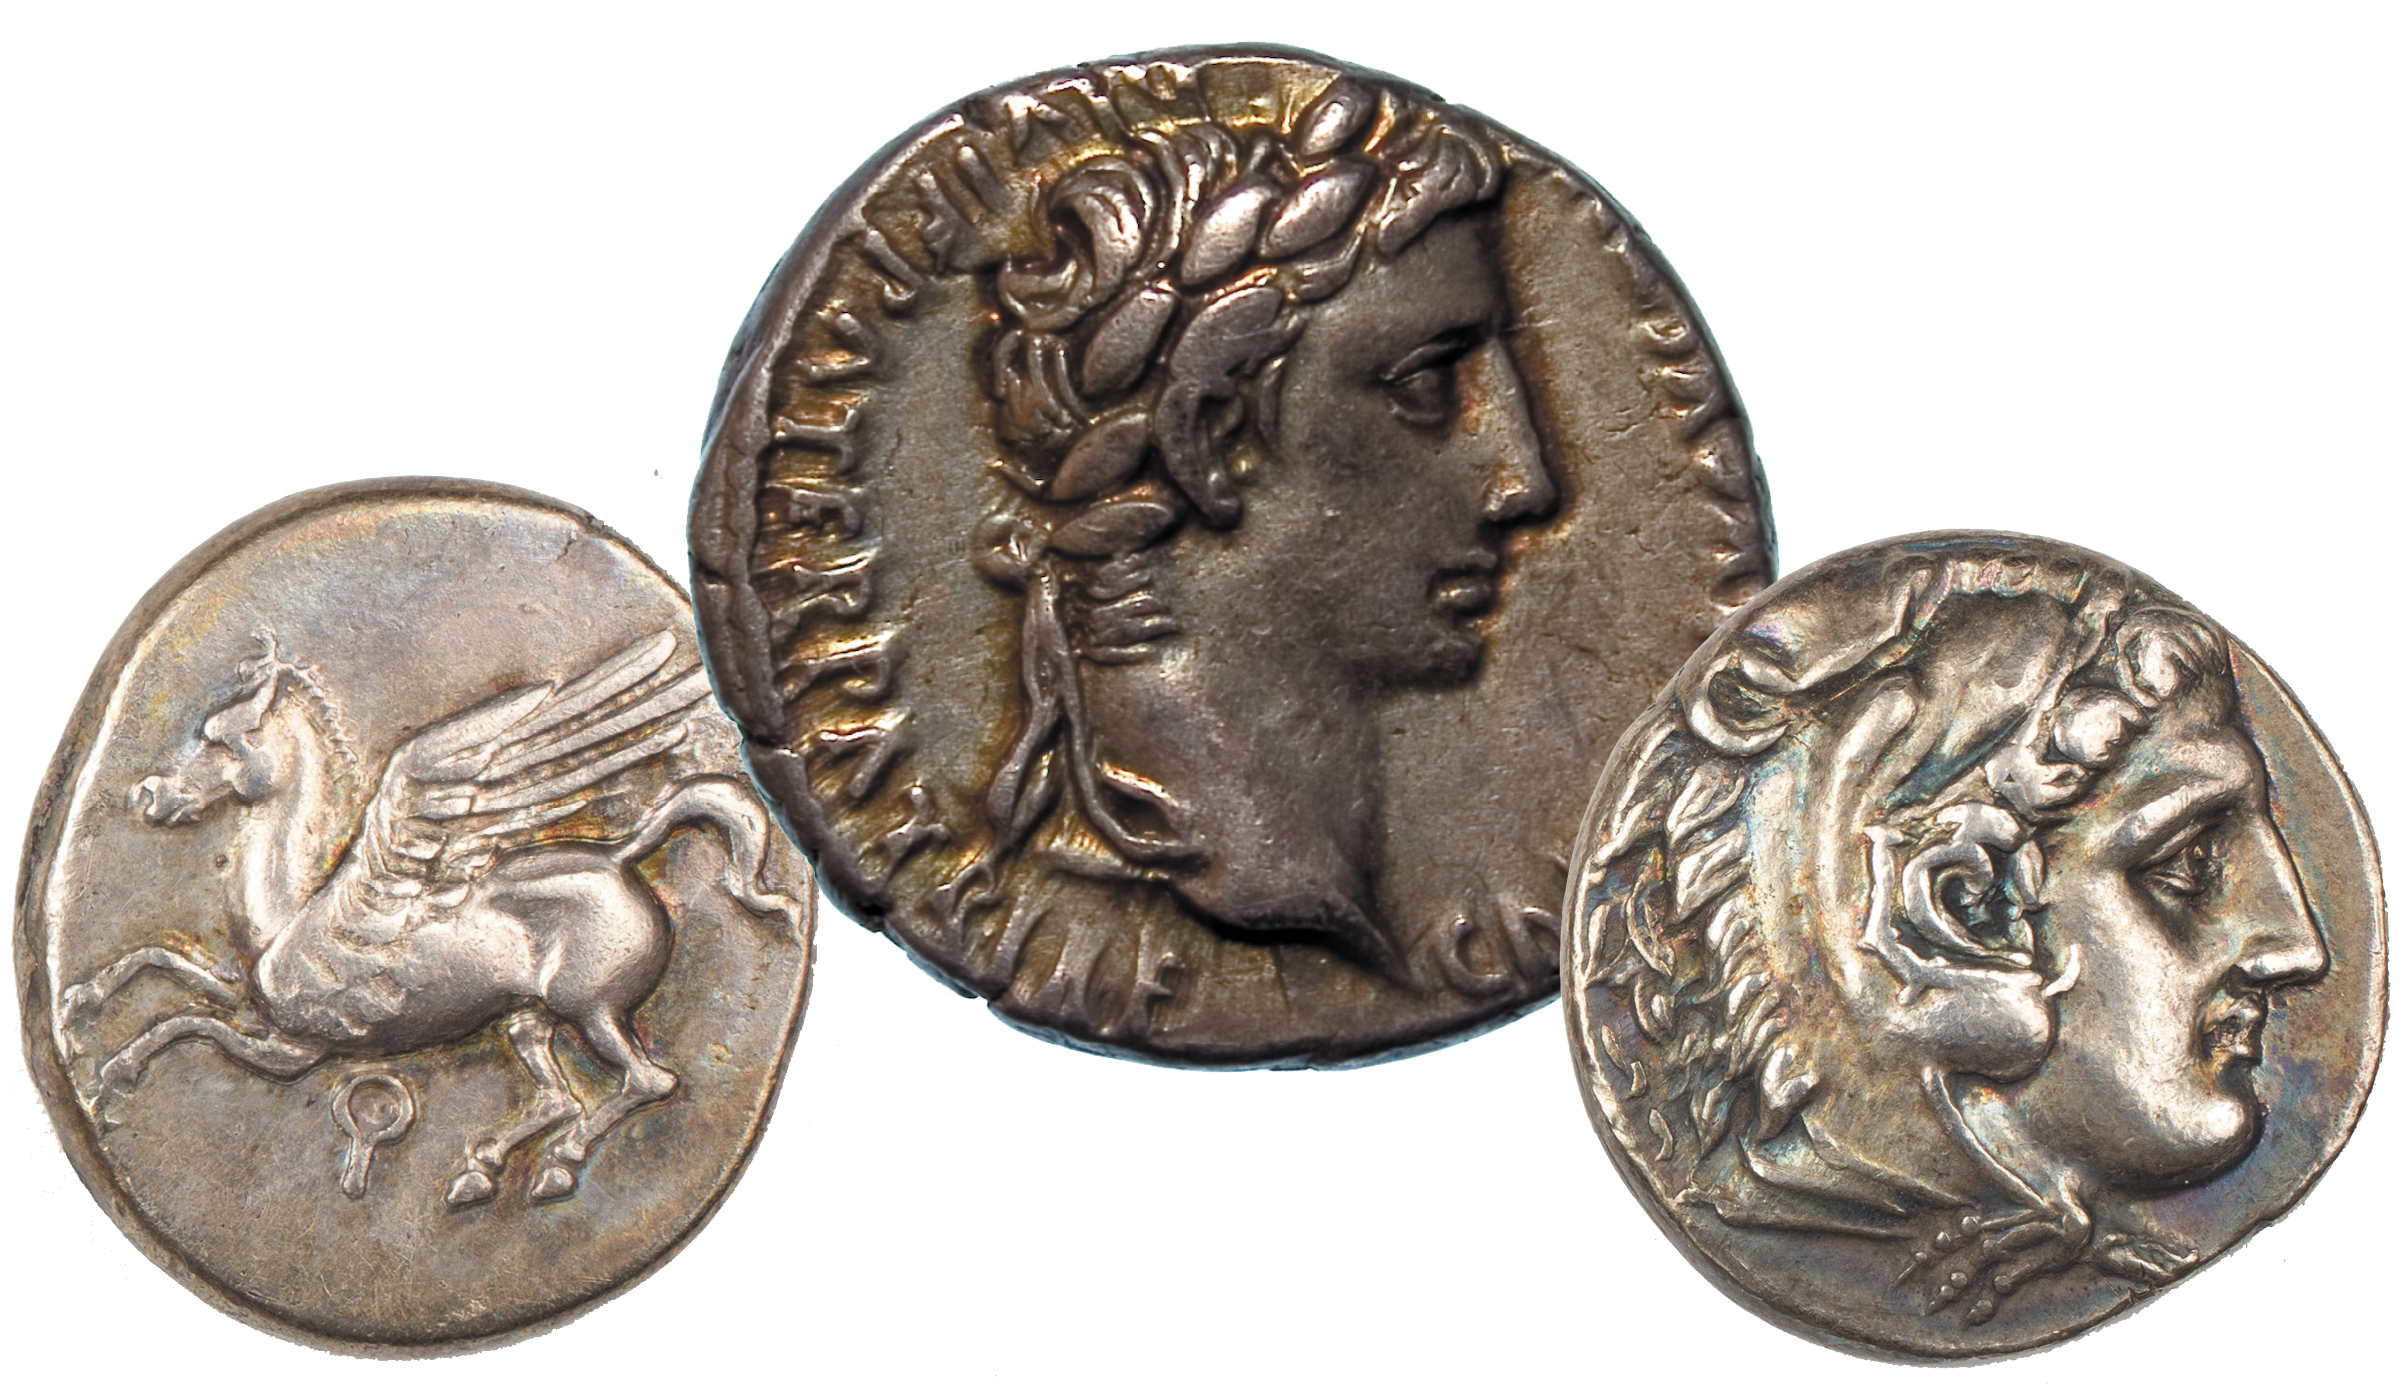 Three ancient coins - at left the coin features a pegasus, and the middle and right coins feature heads